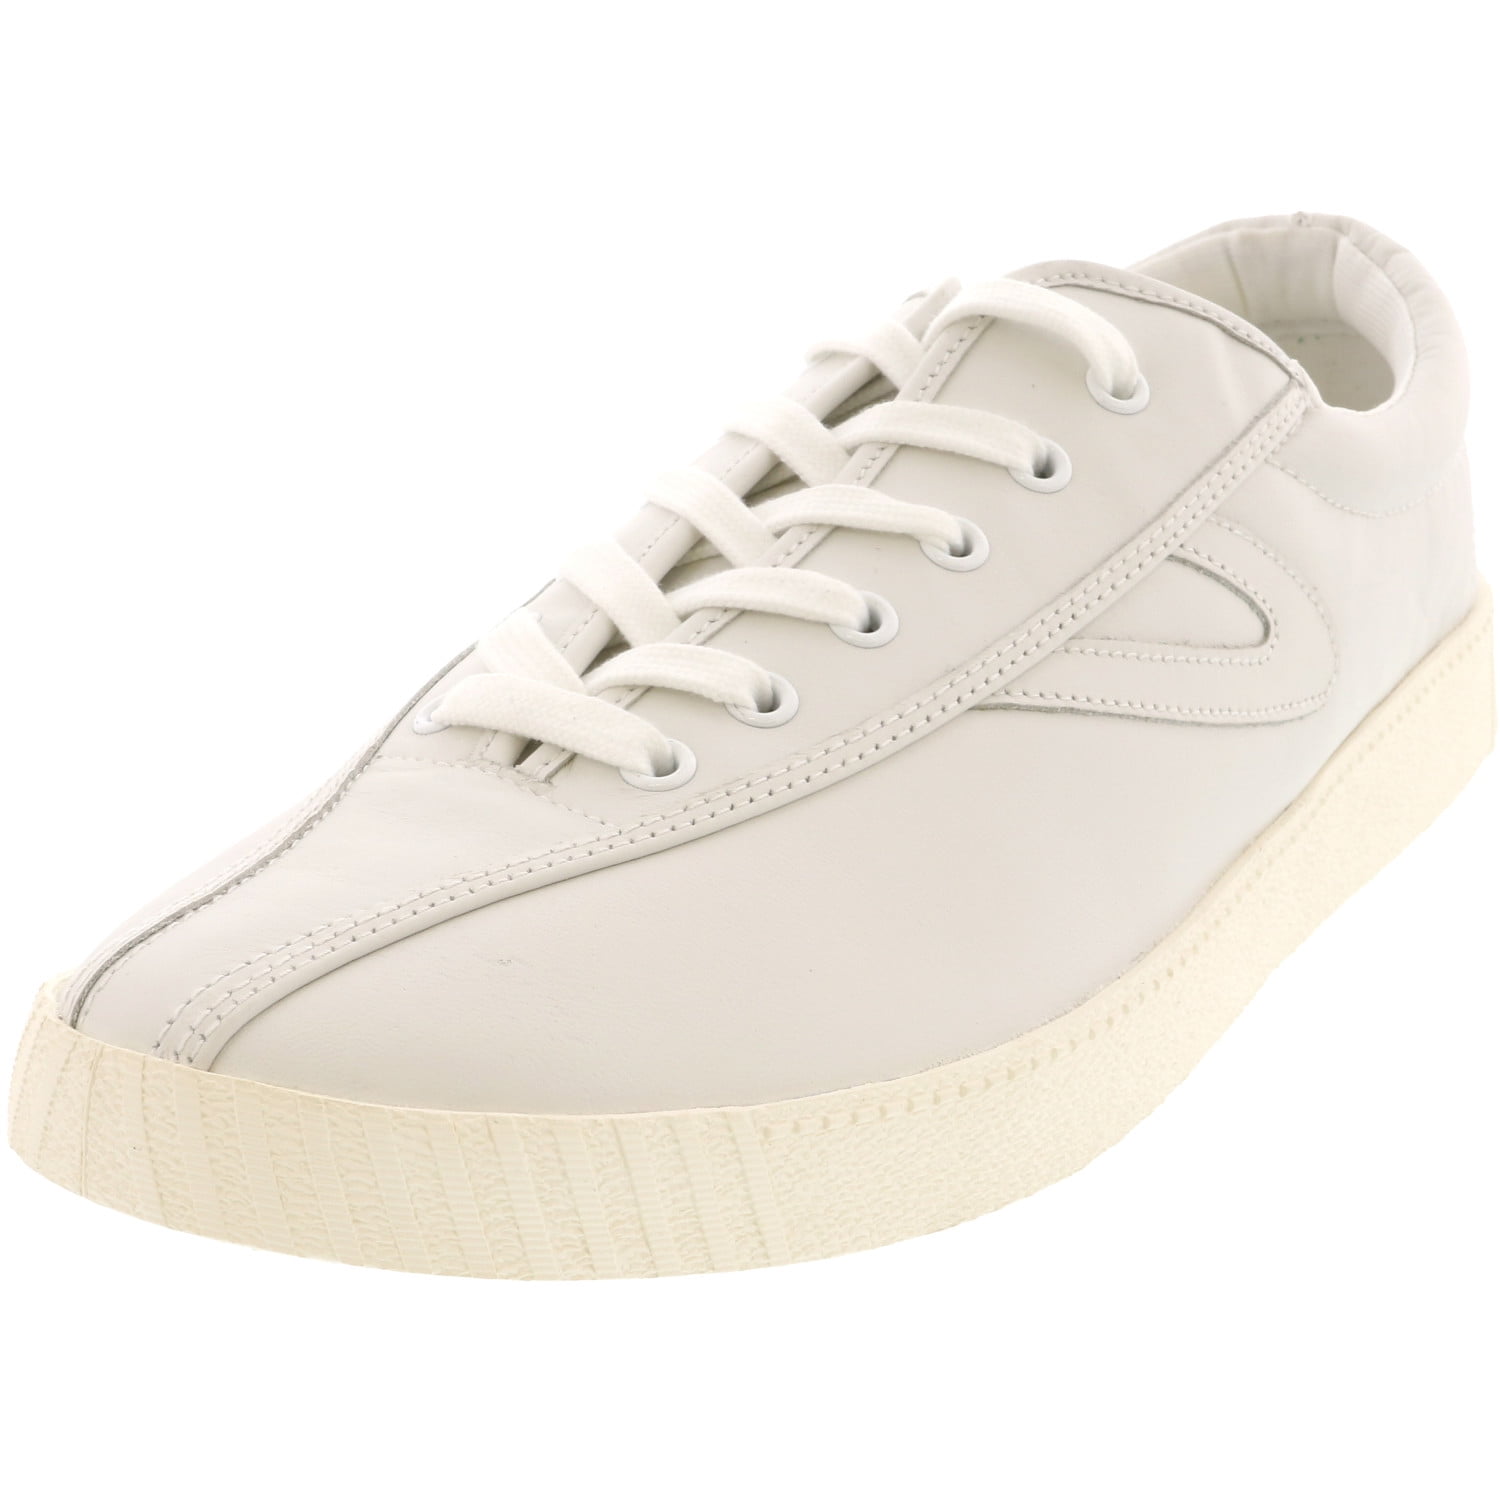 tretorn leather tennis shoes